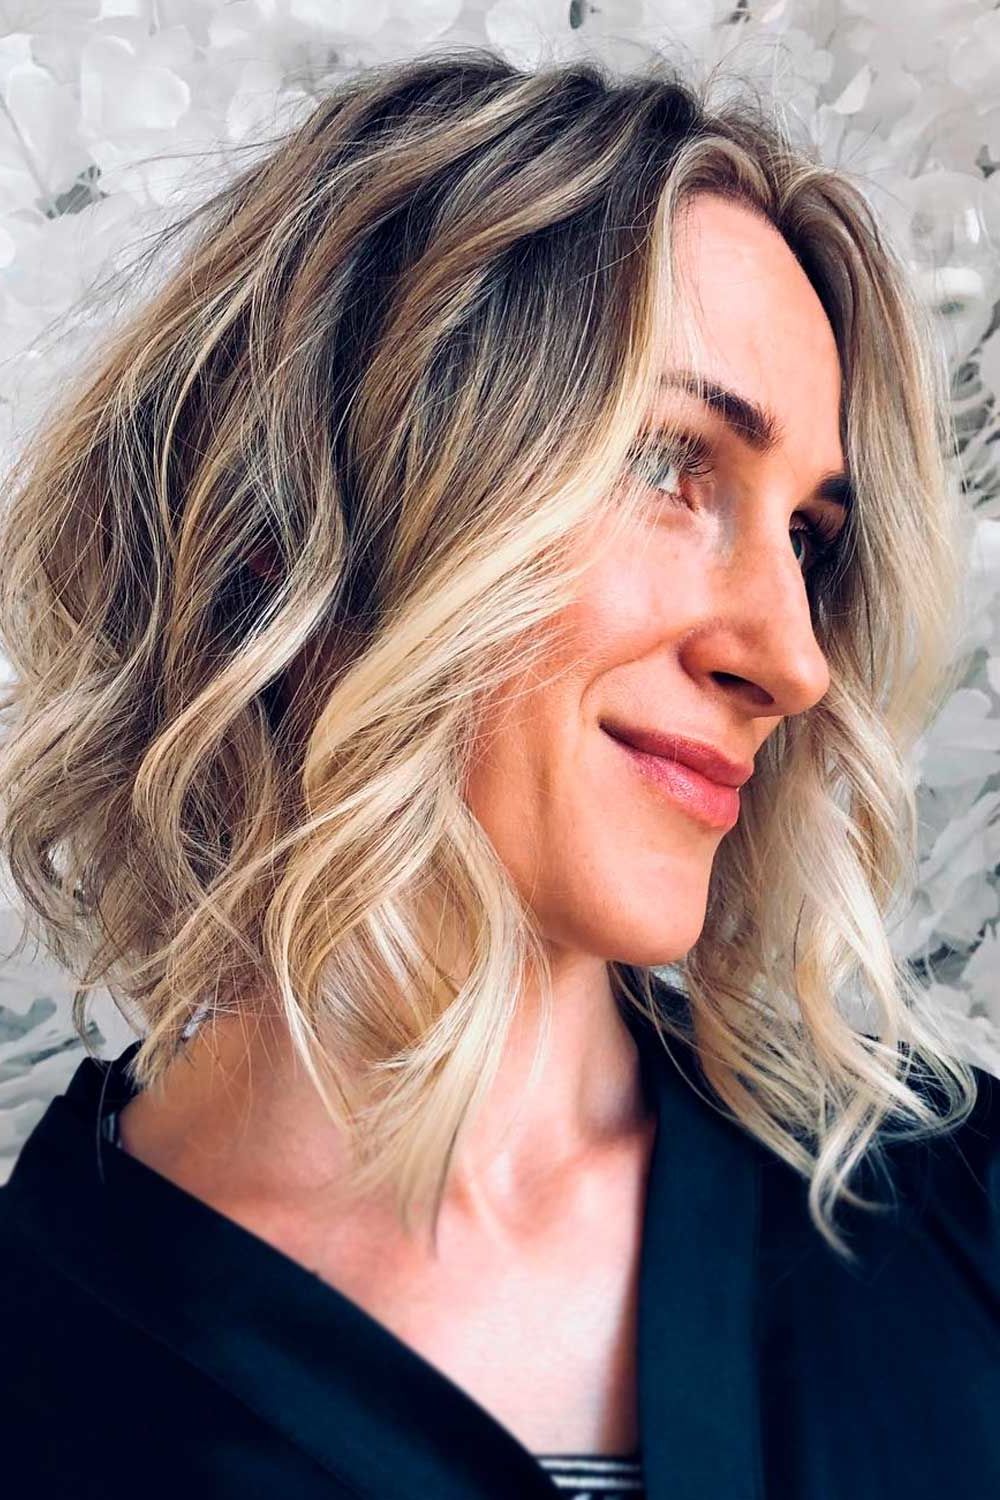 Untraditional Lob Haircut Ideas To Give A Try | Lovehairstyles Inside Recent Shaggy Blonde Lob Haircuts (View 12 of 25)